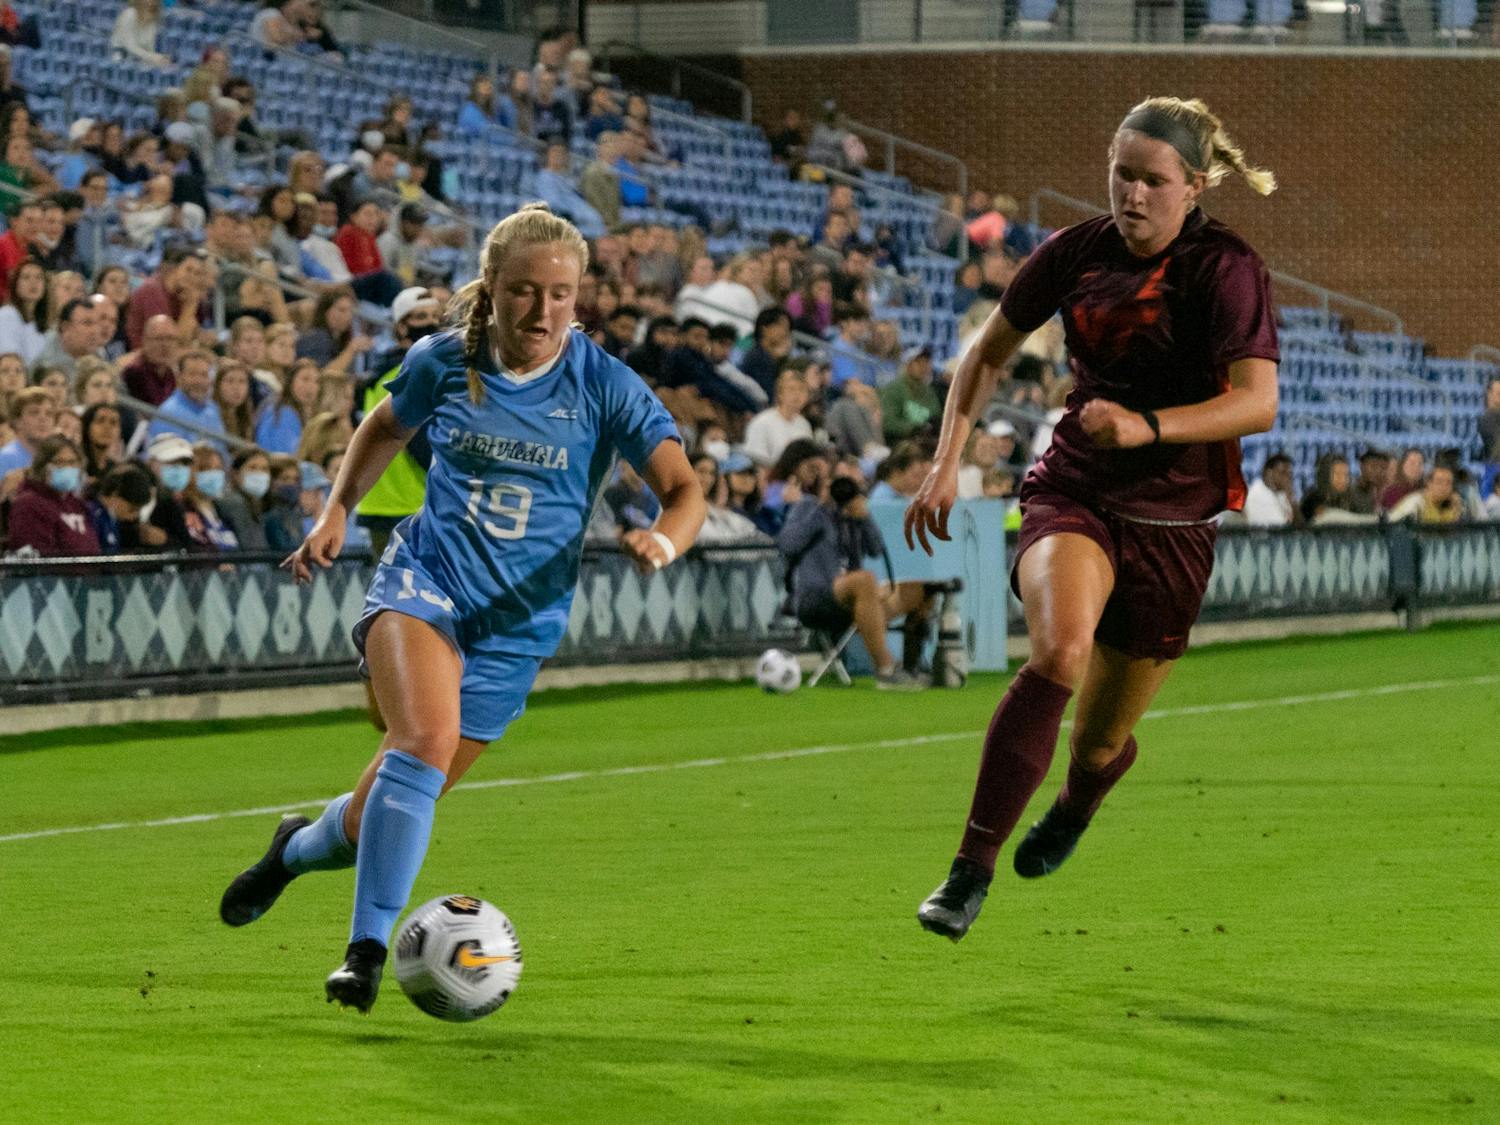 UNC first-year midfielder Emily Colton (19) runs with the ball at the game against Virginia Tech on Sept. 23 at Dorrance Field.